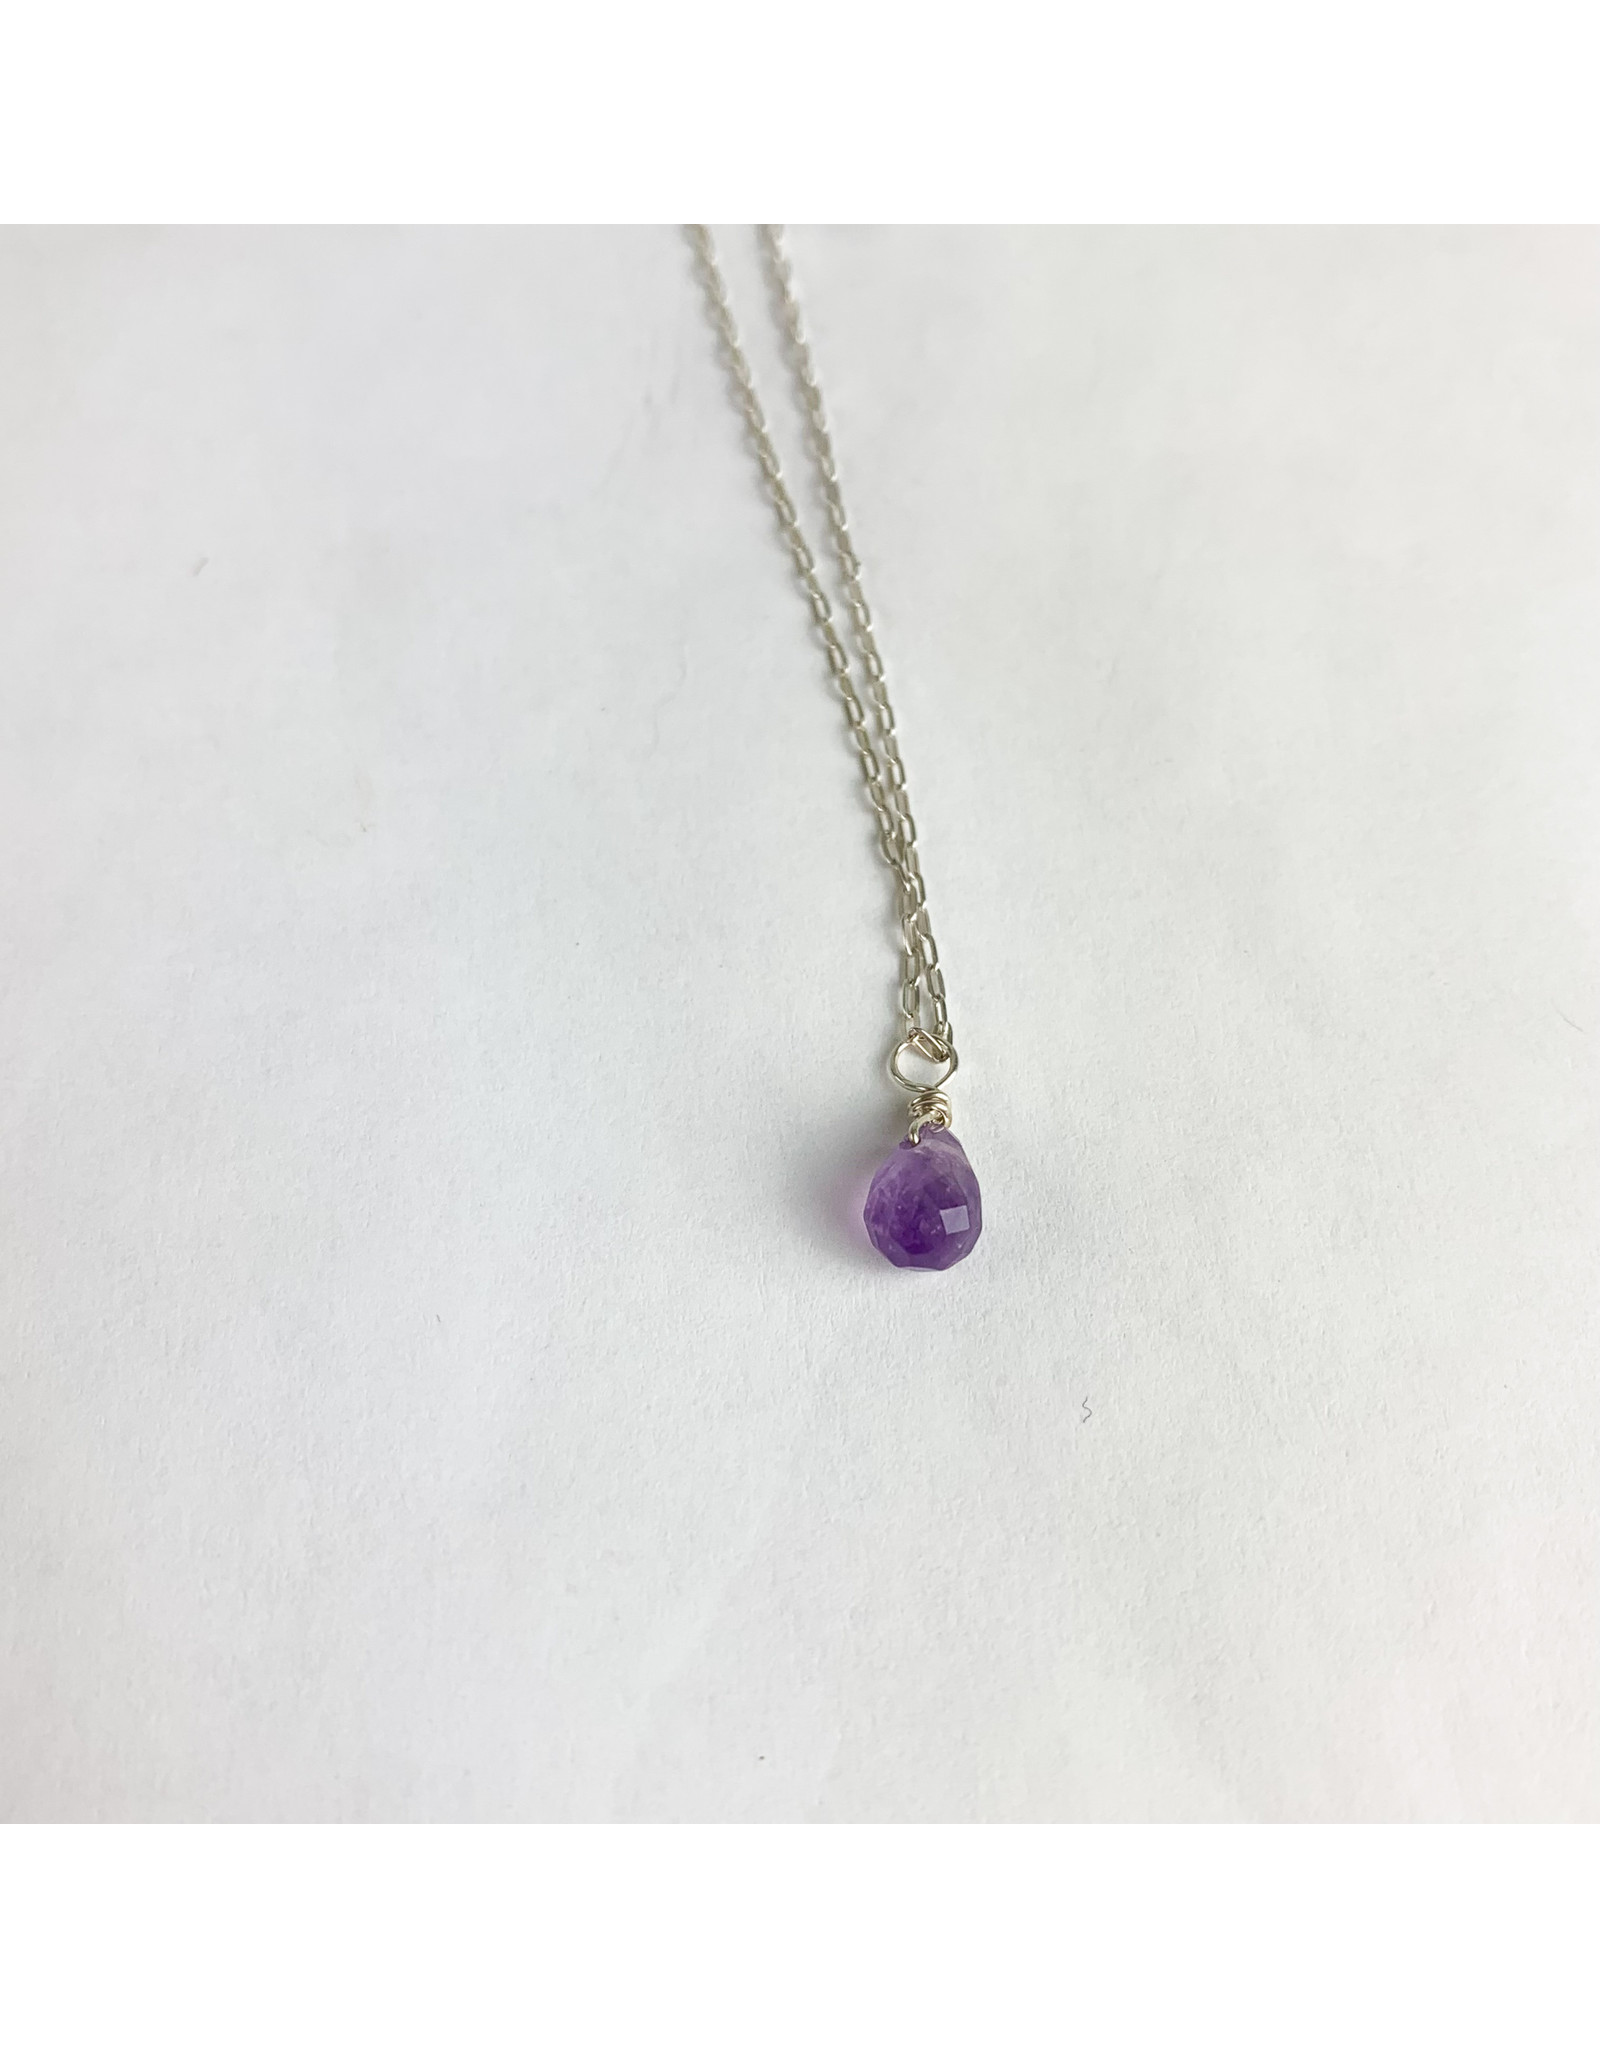 Nicole Collodoro - Consignment Artist Simple Silver and Amethyst Consignment